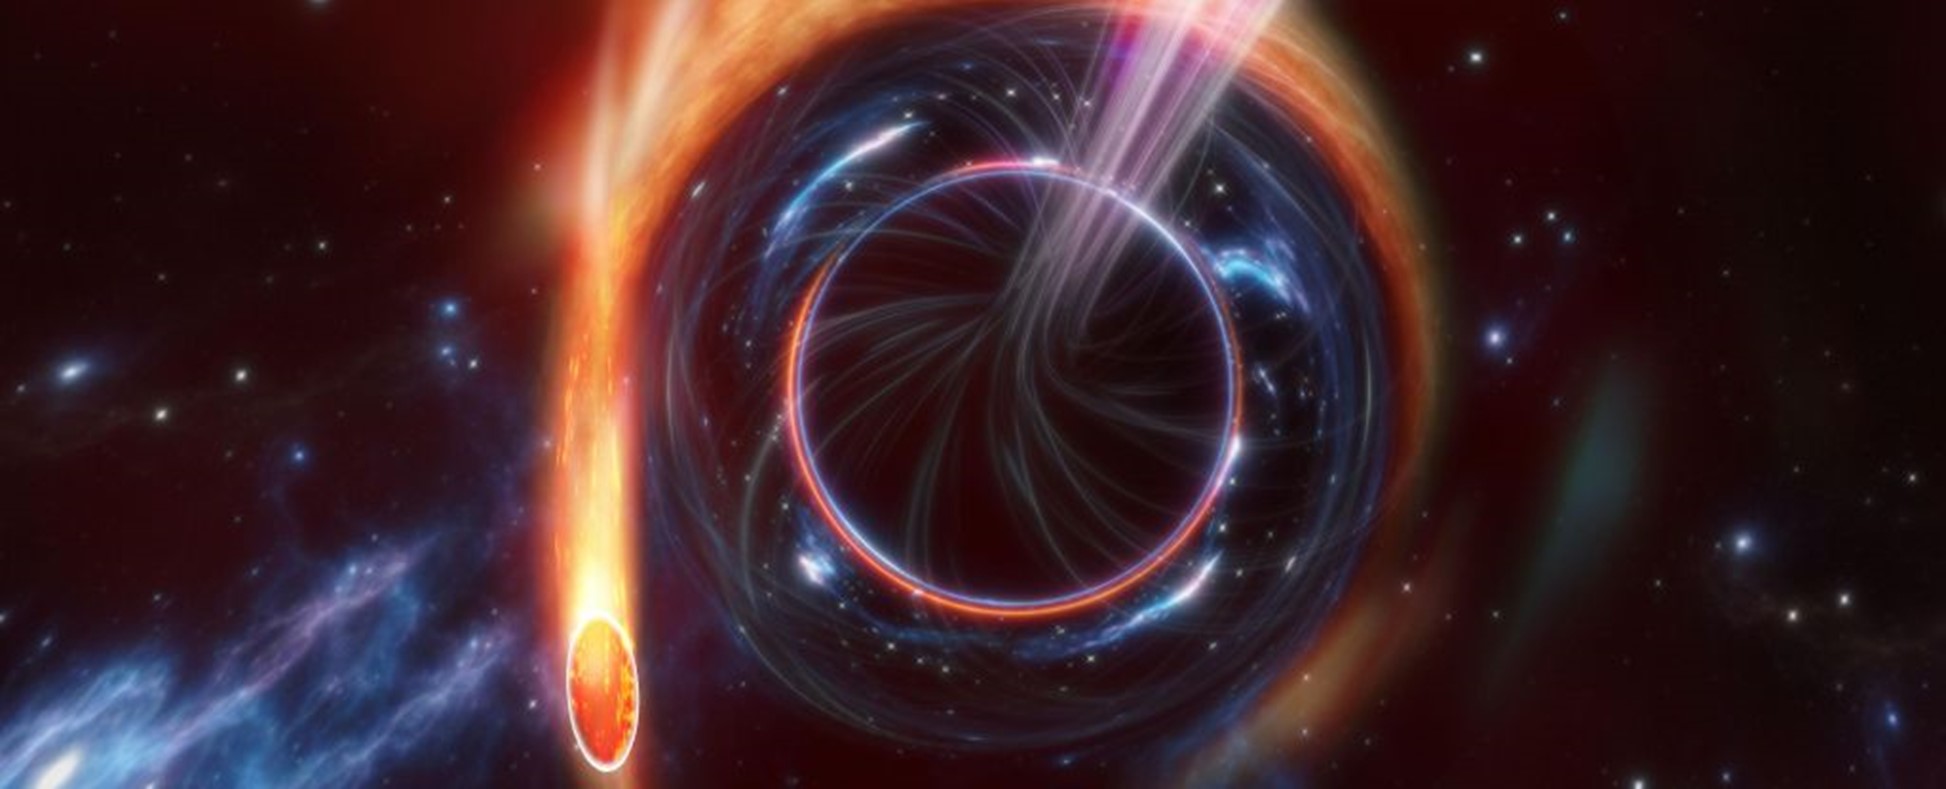 An example of a black hole damaging a star due to tides.